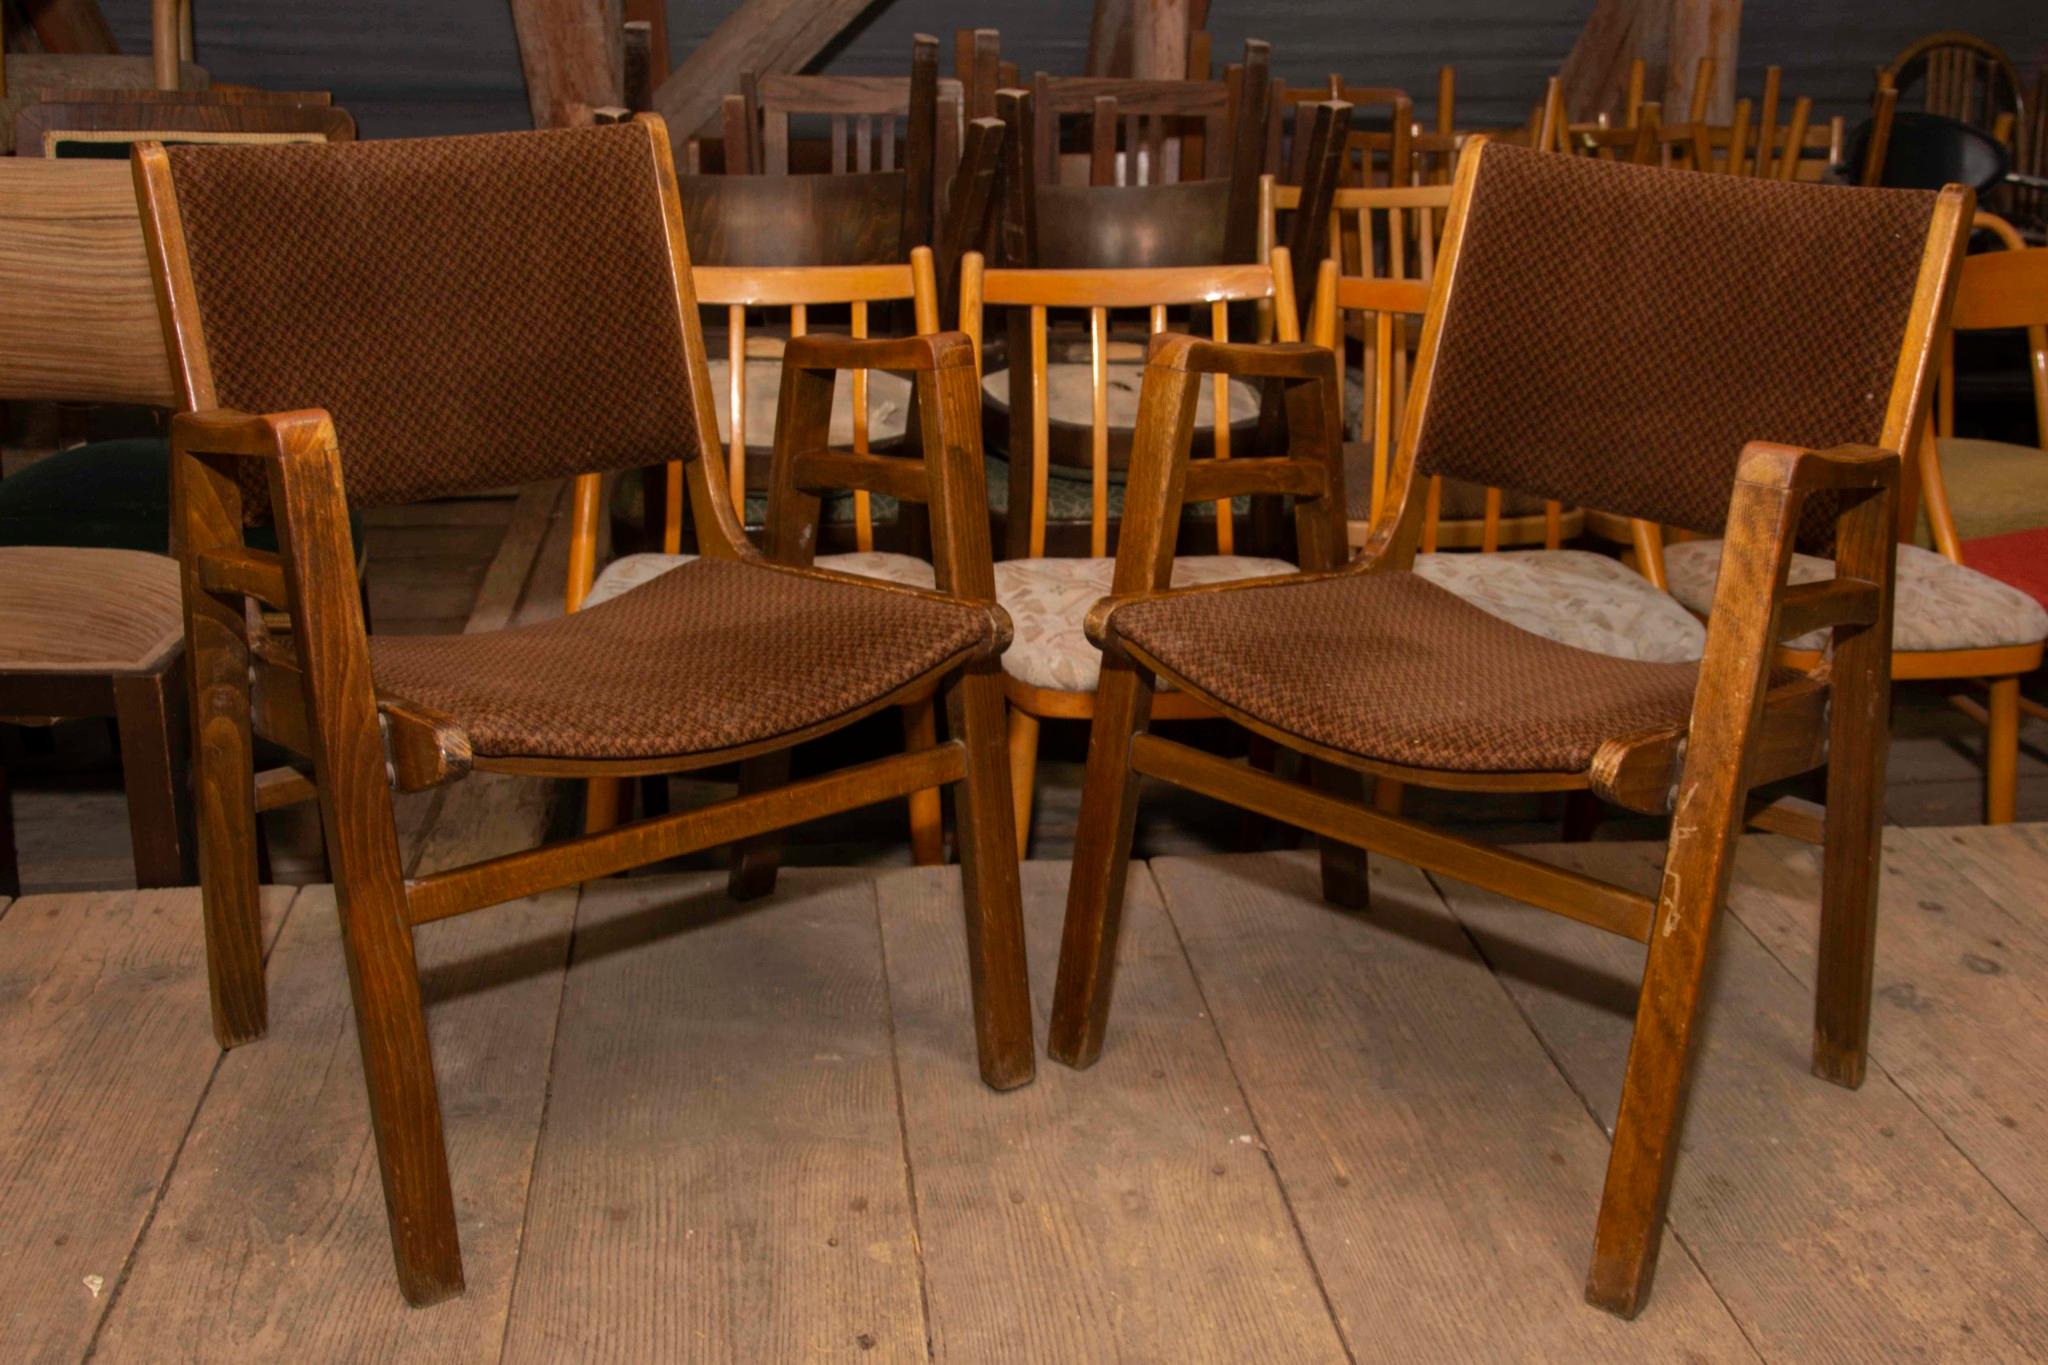 This pair of an interesting vintage chairs was designed by František Jirák. It was made in the former Czechoslovakia in the 1960s. Features an upholstered seats and structure is made of the elm wood. In very good original condition, bears some signs